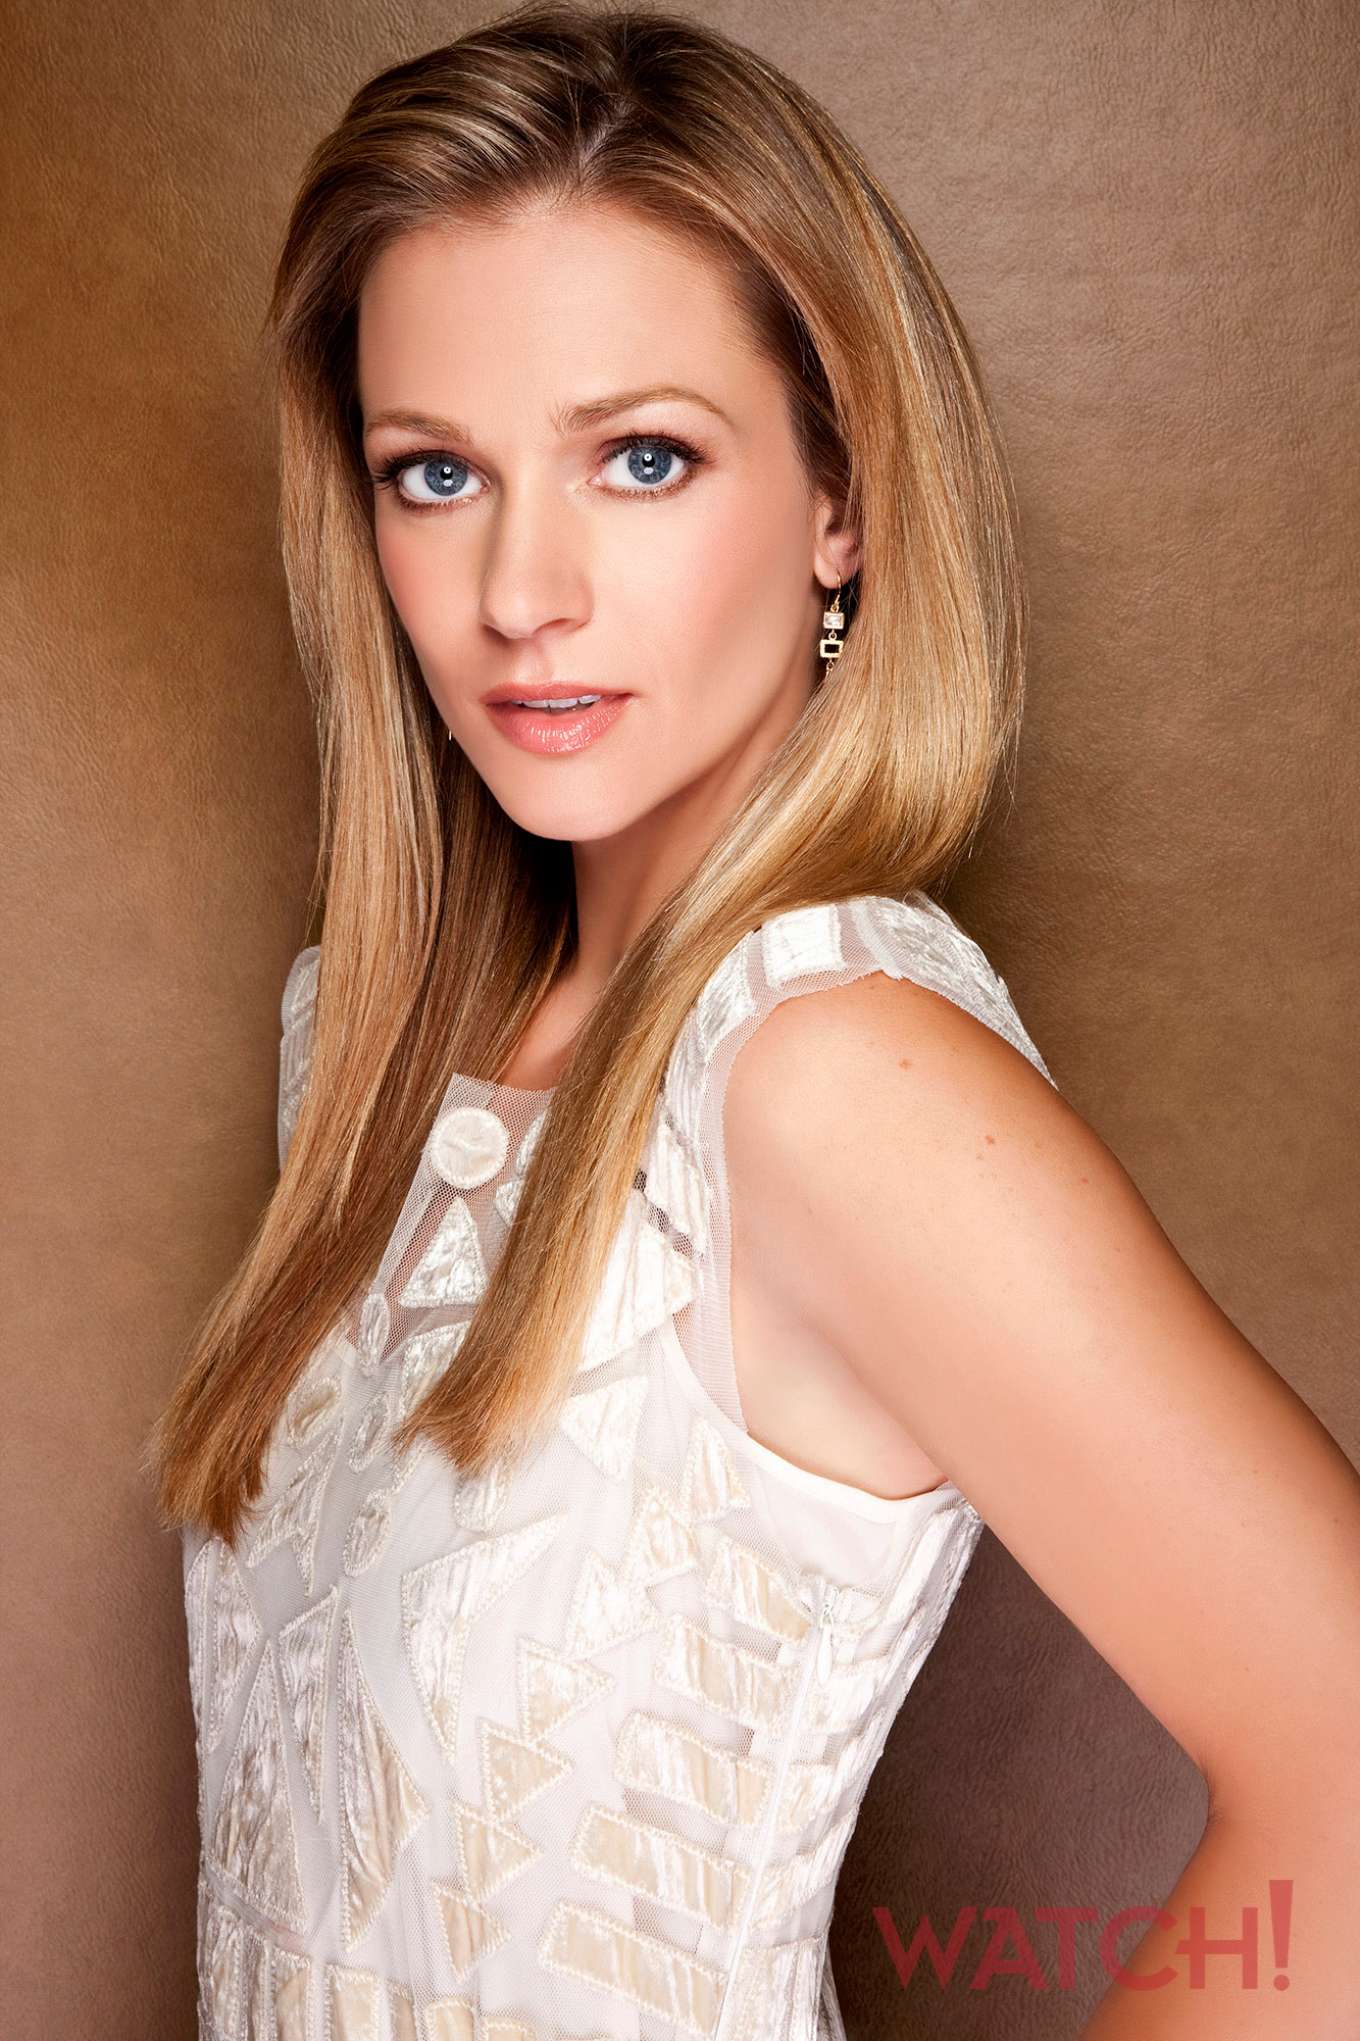 A.J. Cook For Watch Magazine 2018                 A.J.-Cook-for-Watch-Magazine-2018--12